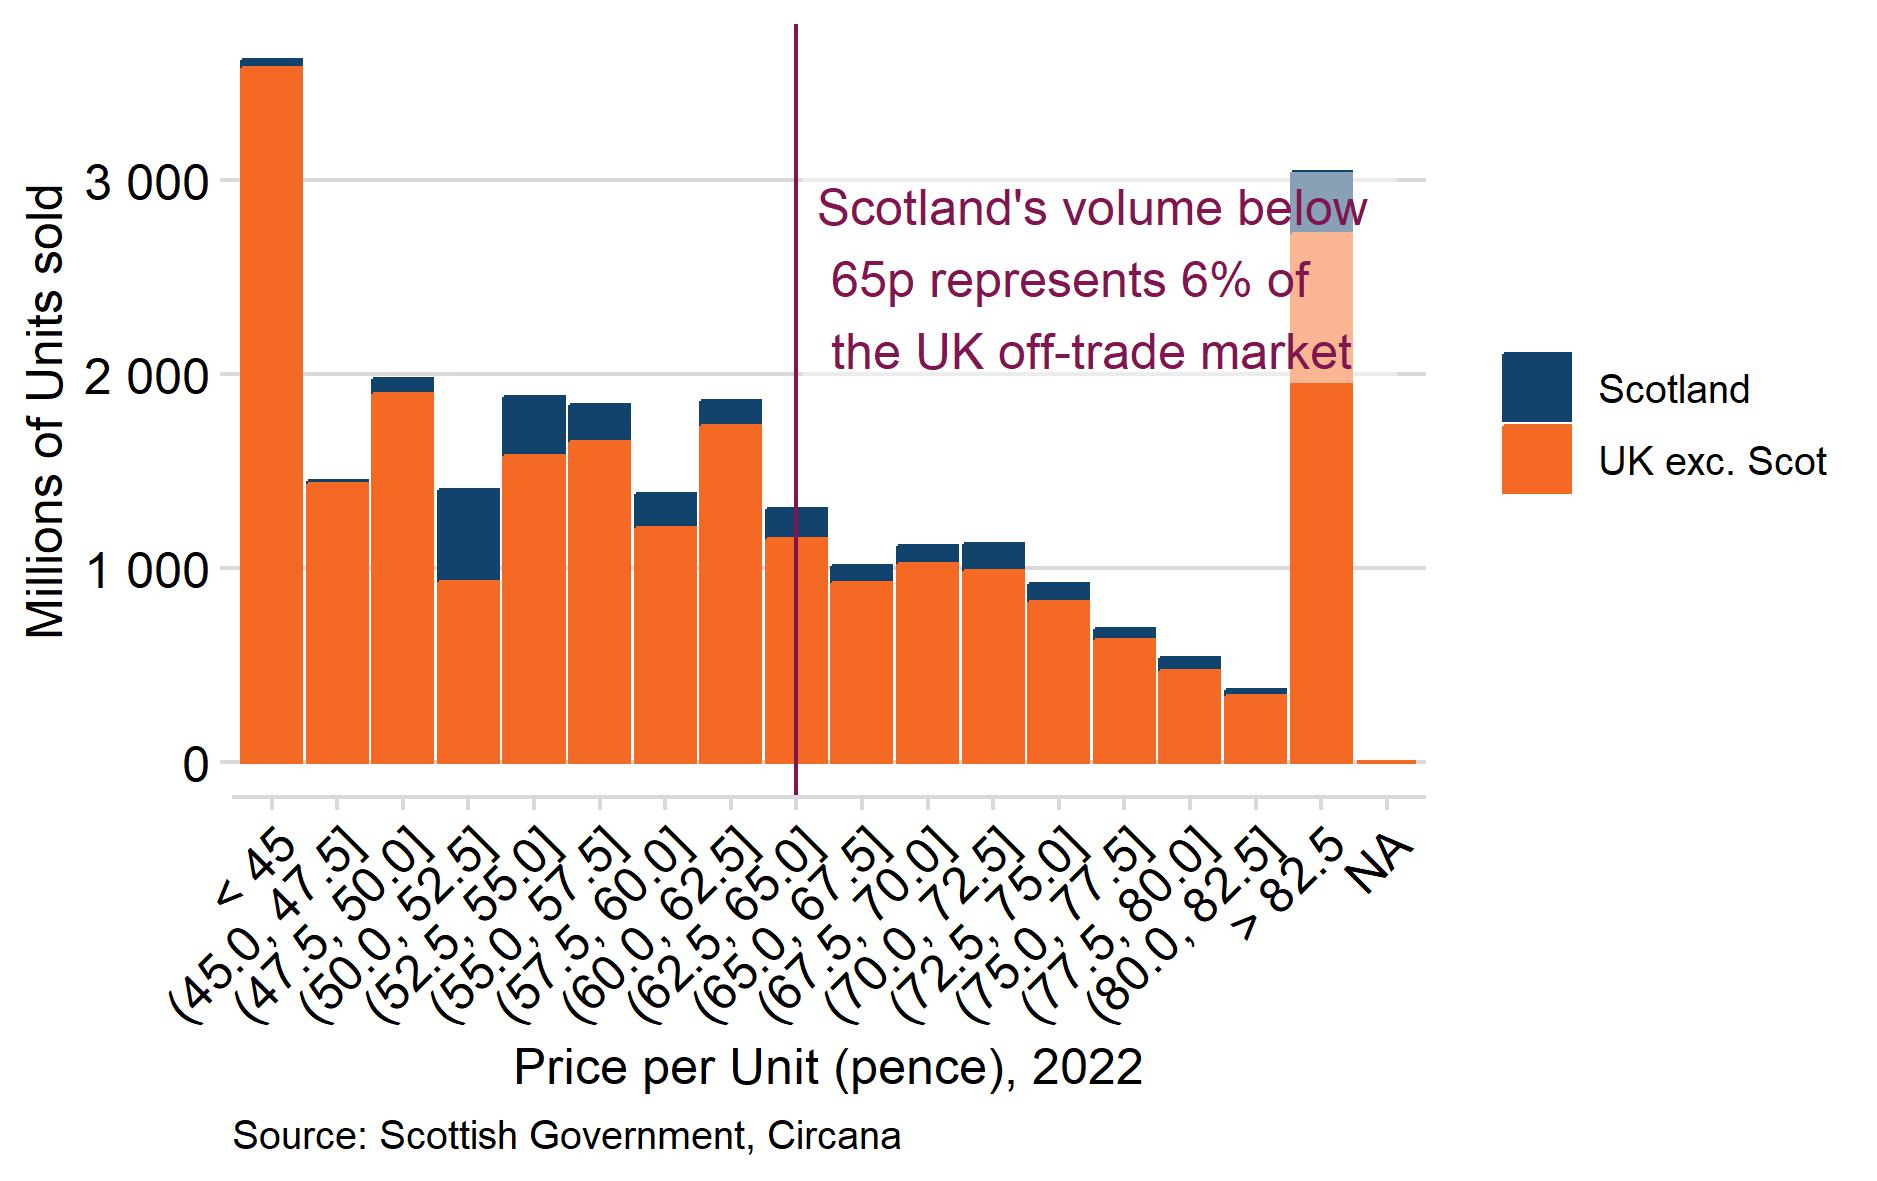 A barchart showing the volume of alcohol sold within Scotland and the rest of the United Kingdom by the price per unit. The figure demonstrates a benchmark of 65ppu to indicate the volume of alcohol sold lower and higher than this level in Scotland and the rest of the UK. Taking into account the whole UK off-trade market, only 6% of the volume of off-trade alcohol was sold in Scotland fell below the 65ppu benchmark in 2022 (off-trade market include supermarkets, off-licences and shops).